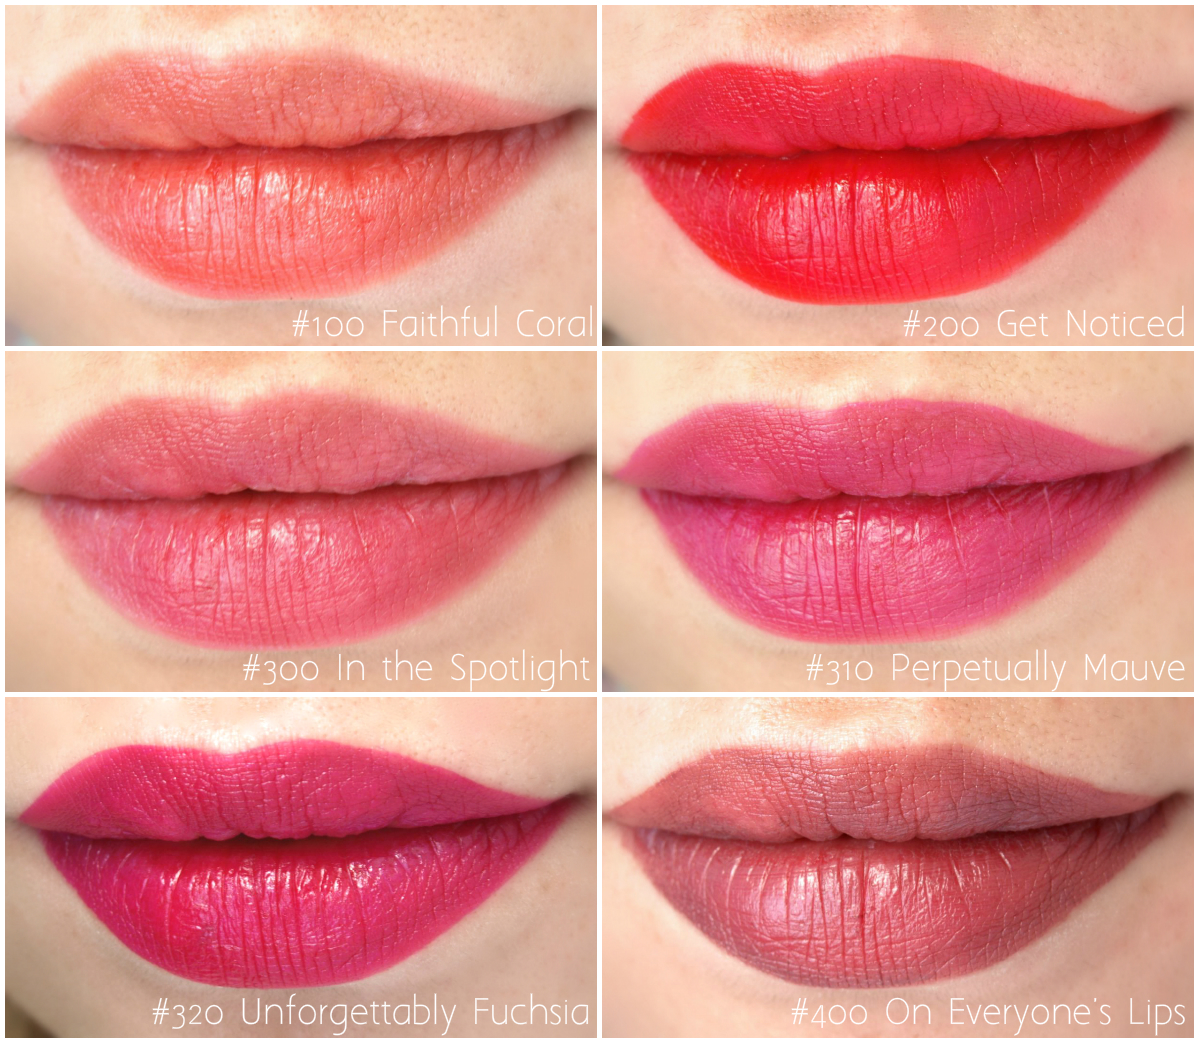 NYC New York Color Smooch Proof Liquid Lip Stain: Review and Swatches